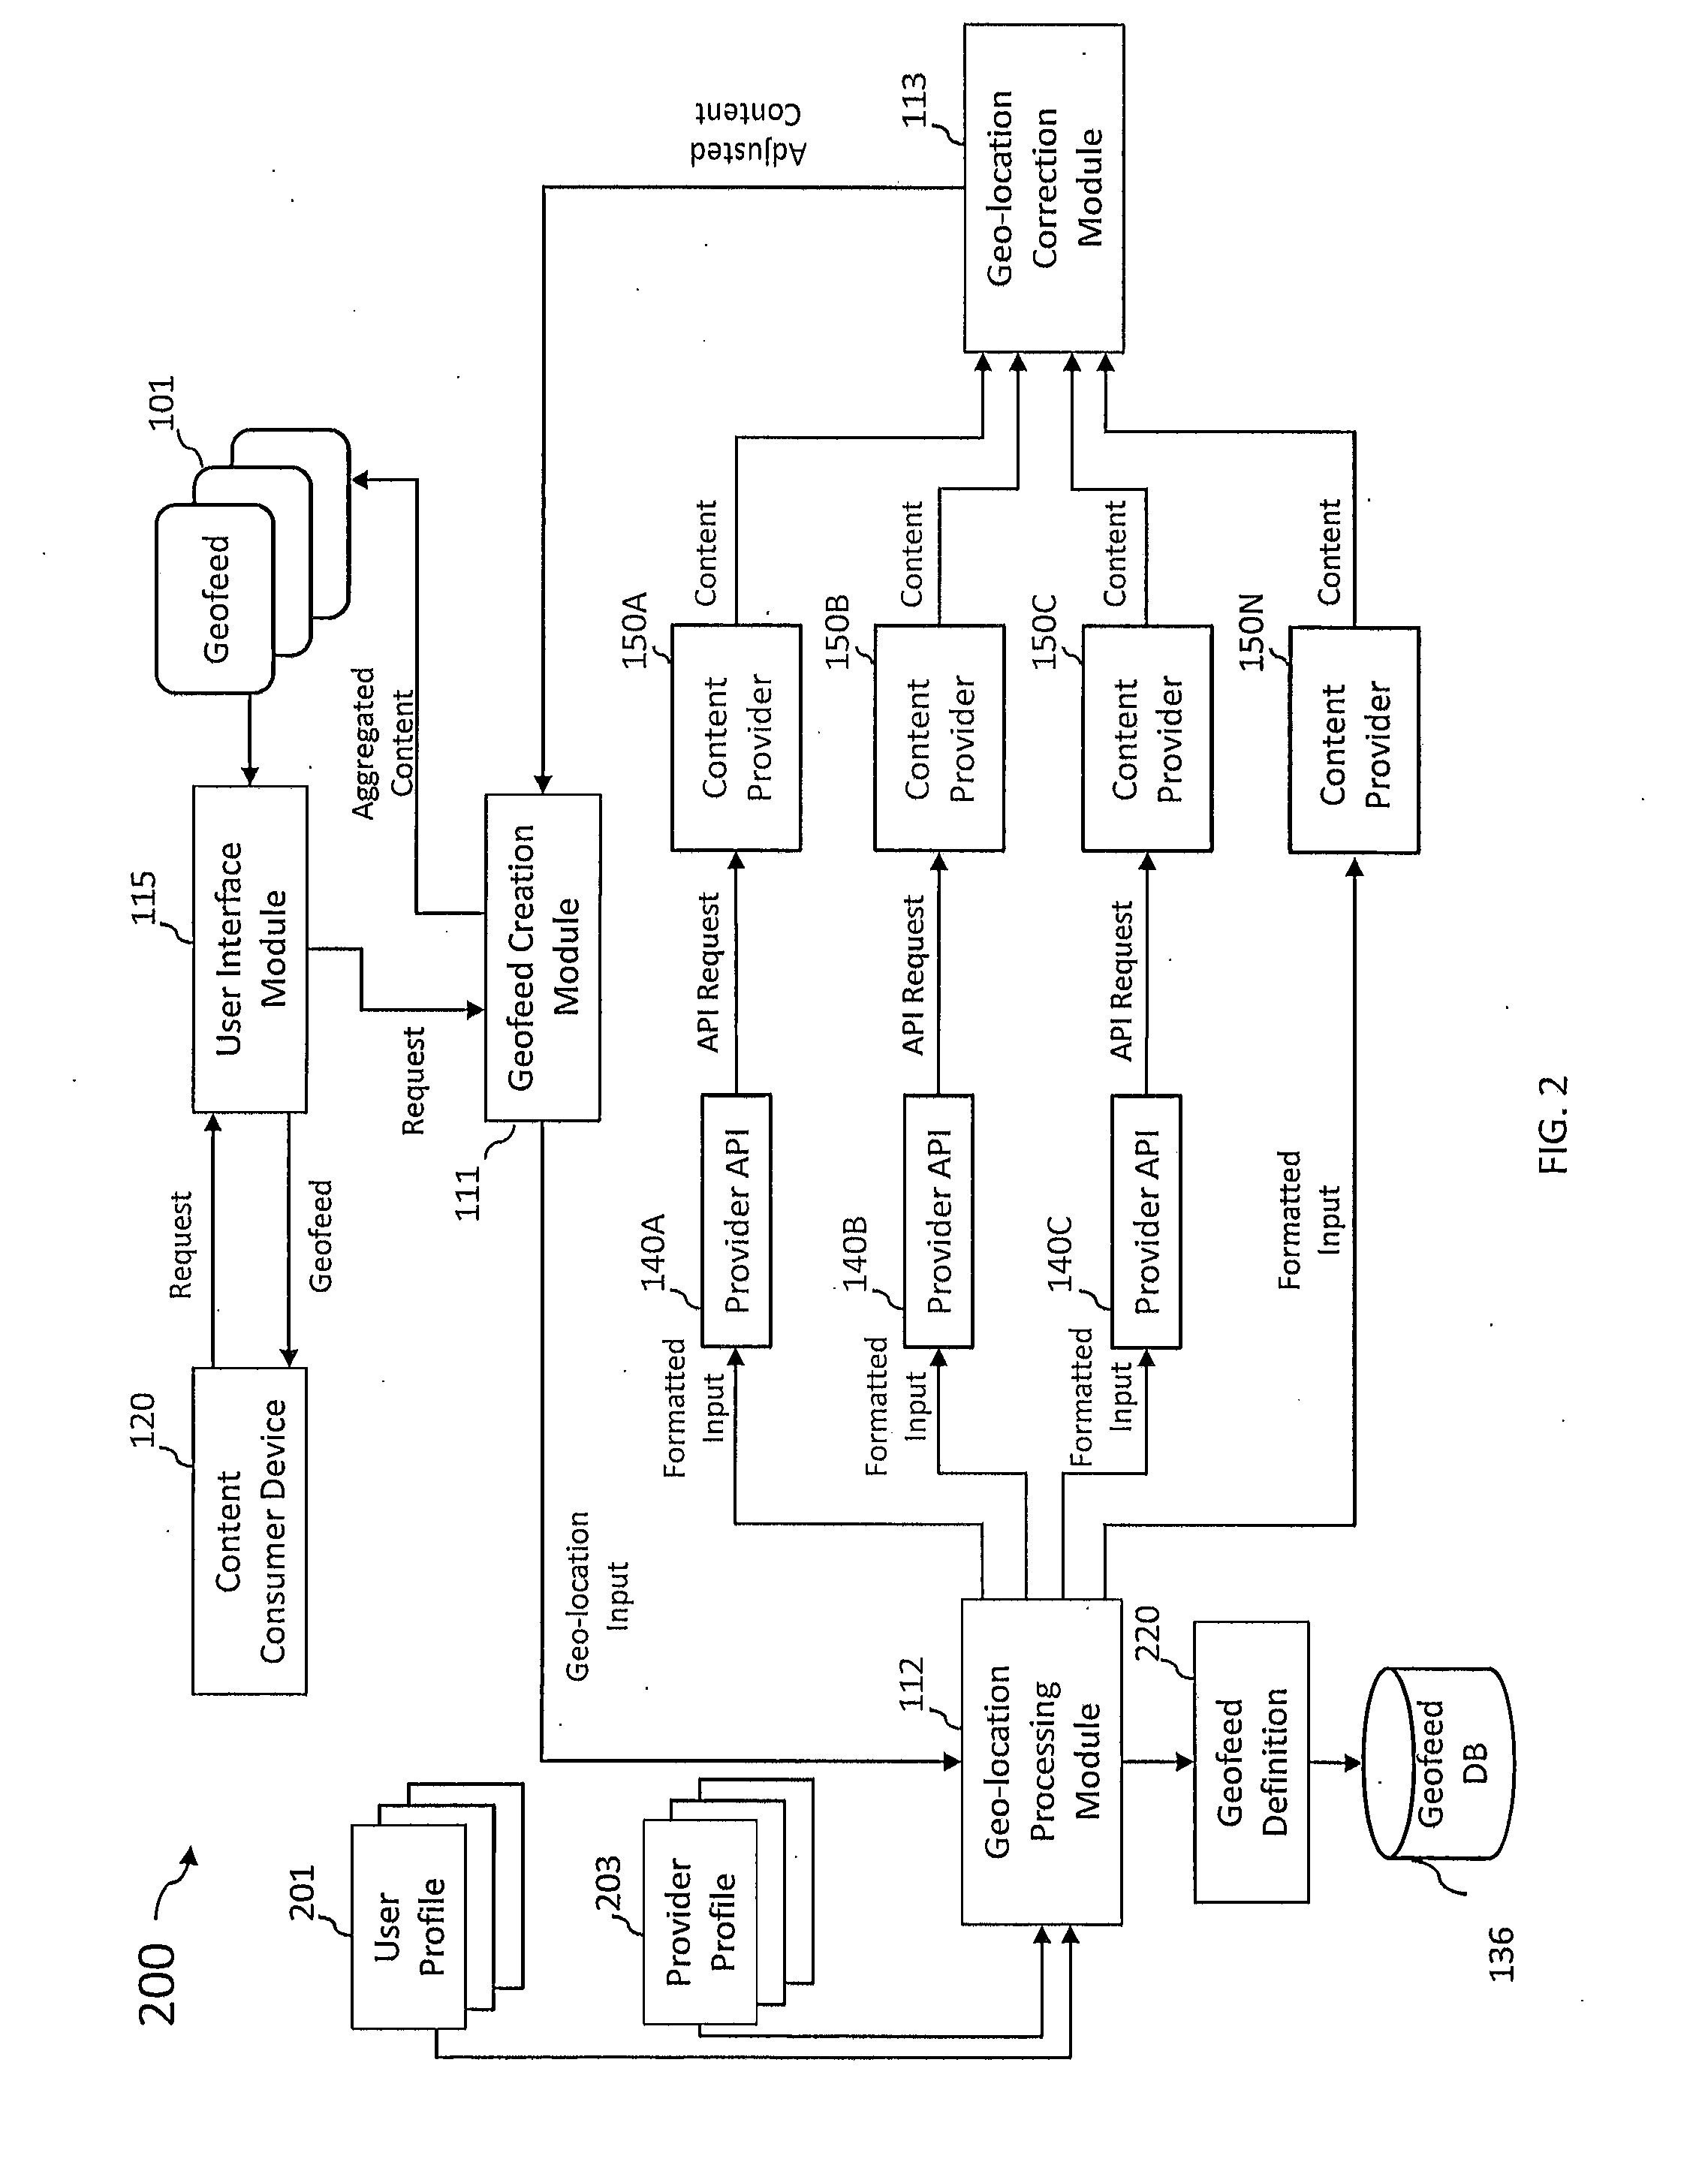 System and method for differentially processing a location input for content providers that use different location input formats